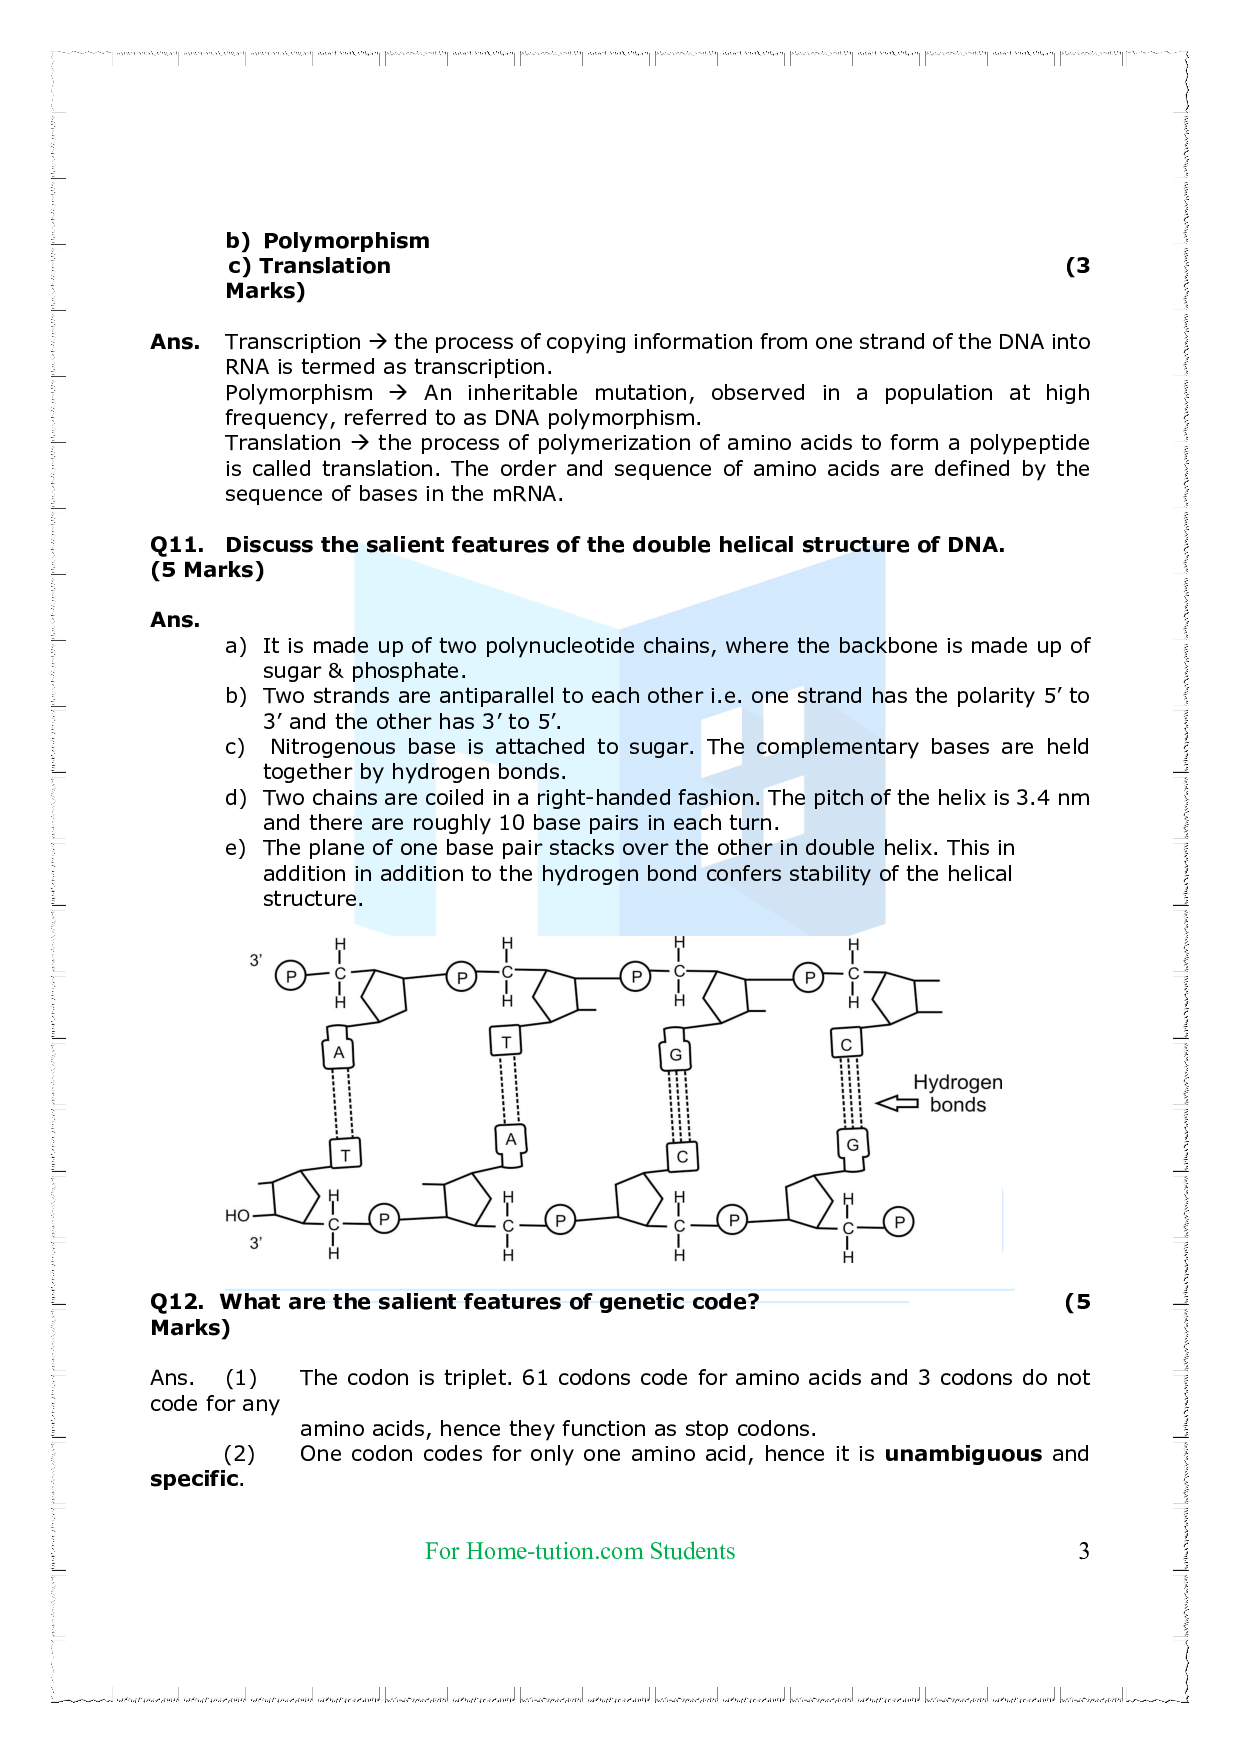 Chapter-6 Molecular Basis of Inheritance Questions